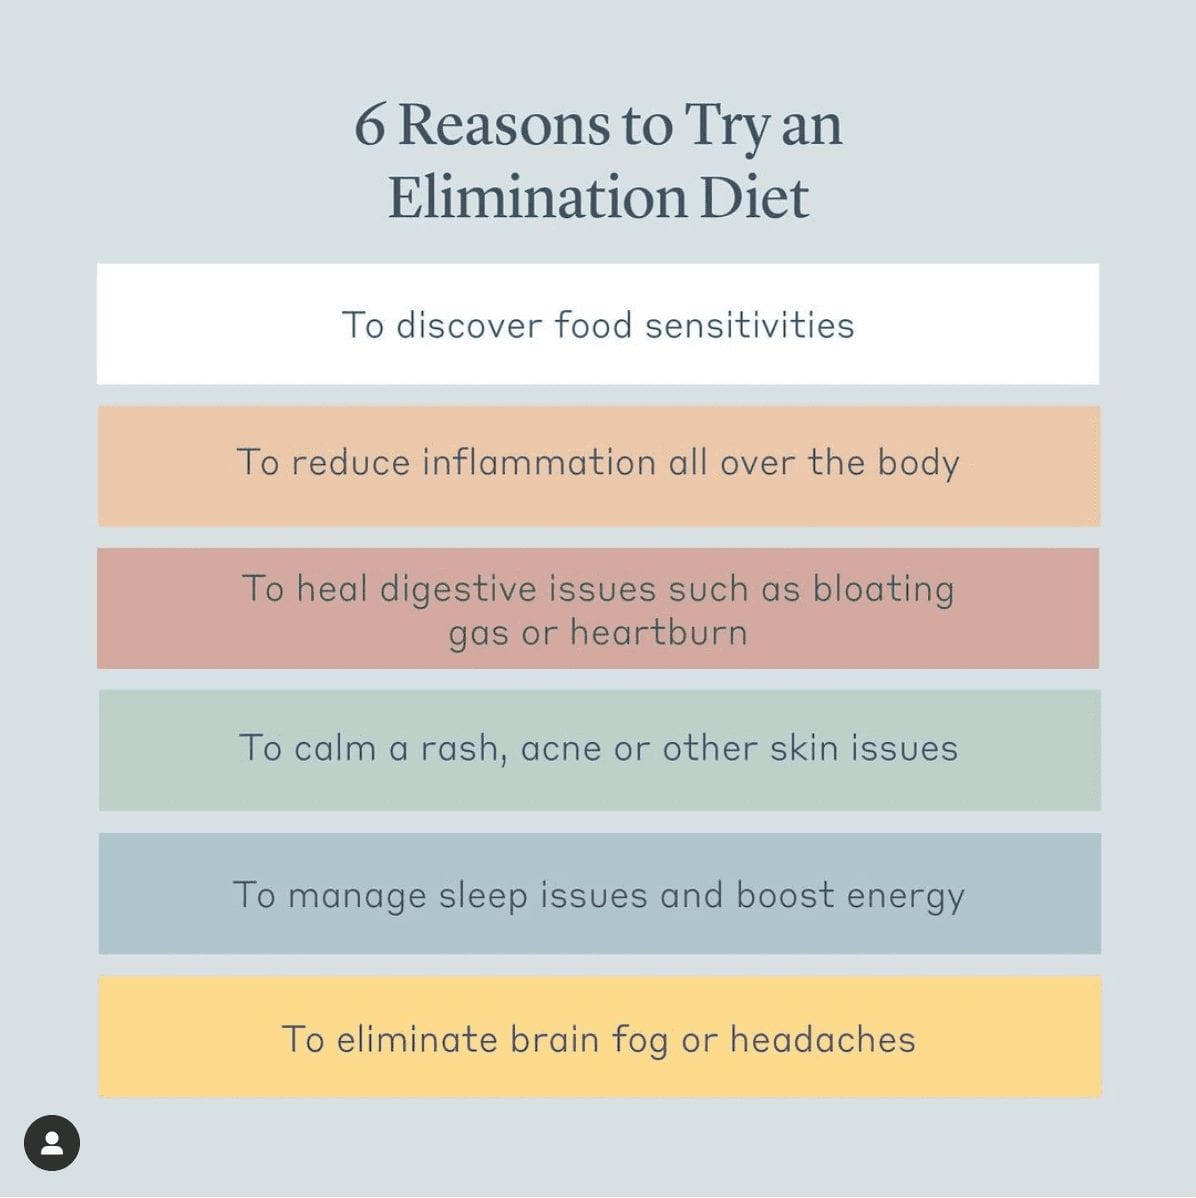 6 Reasons to Try and Elimination Diet